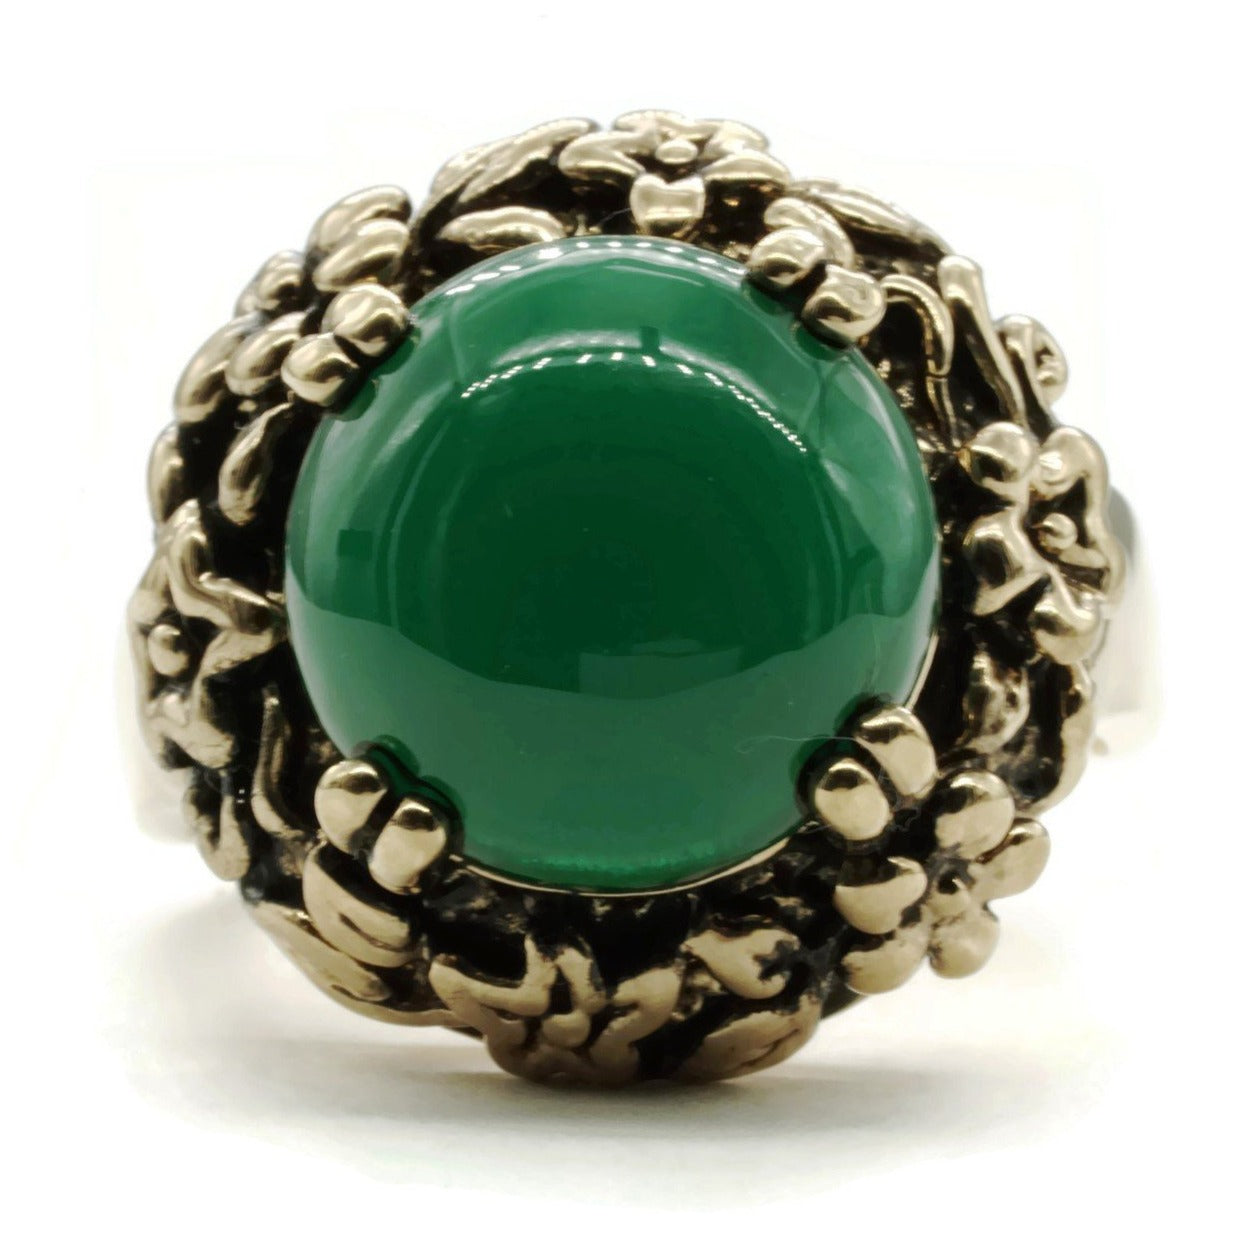 Simulated Green Agate Stone Floral Adjustable Statement Ring